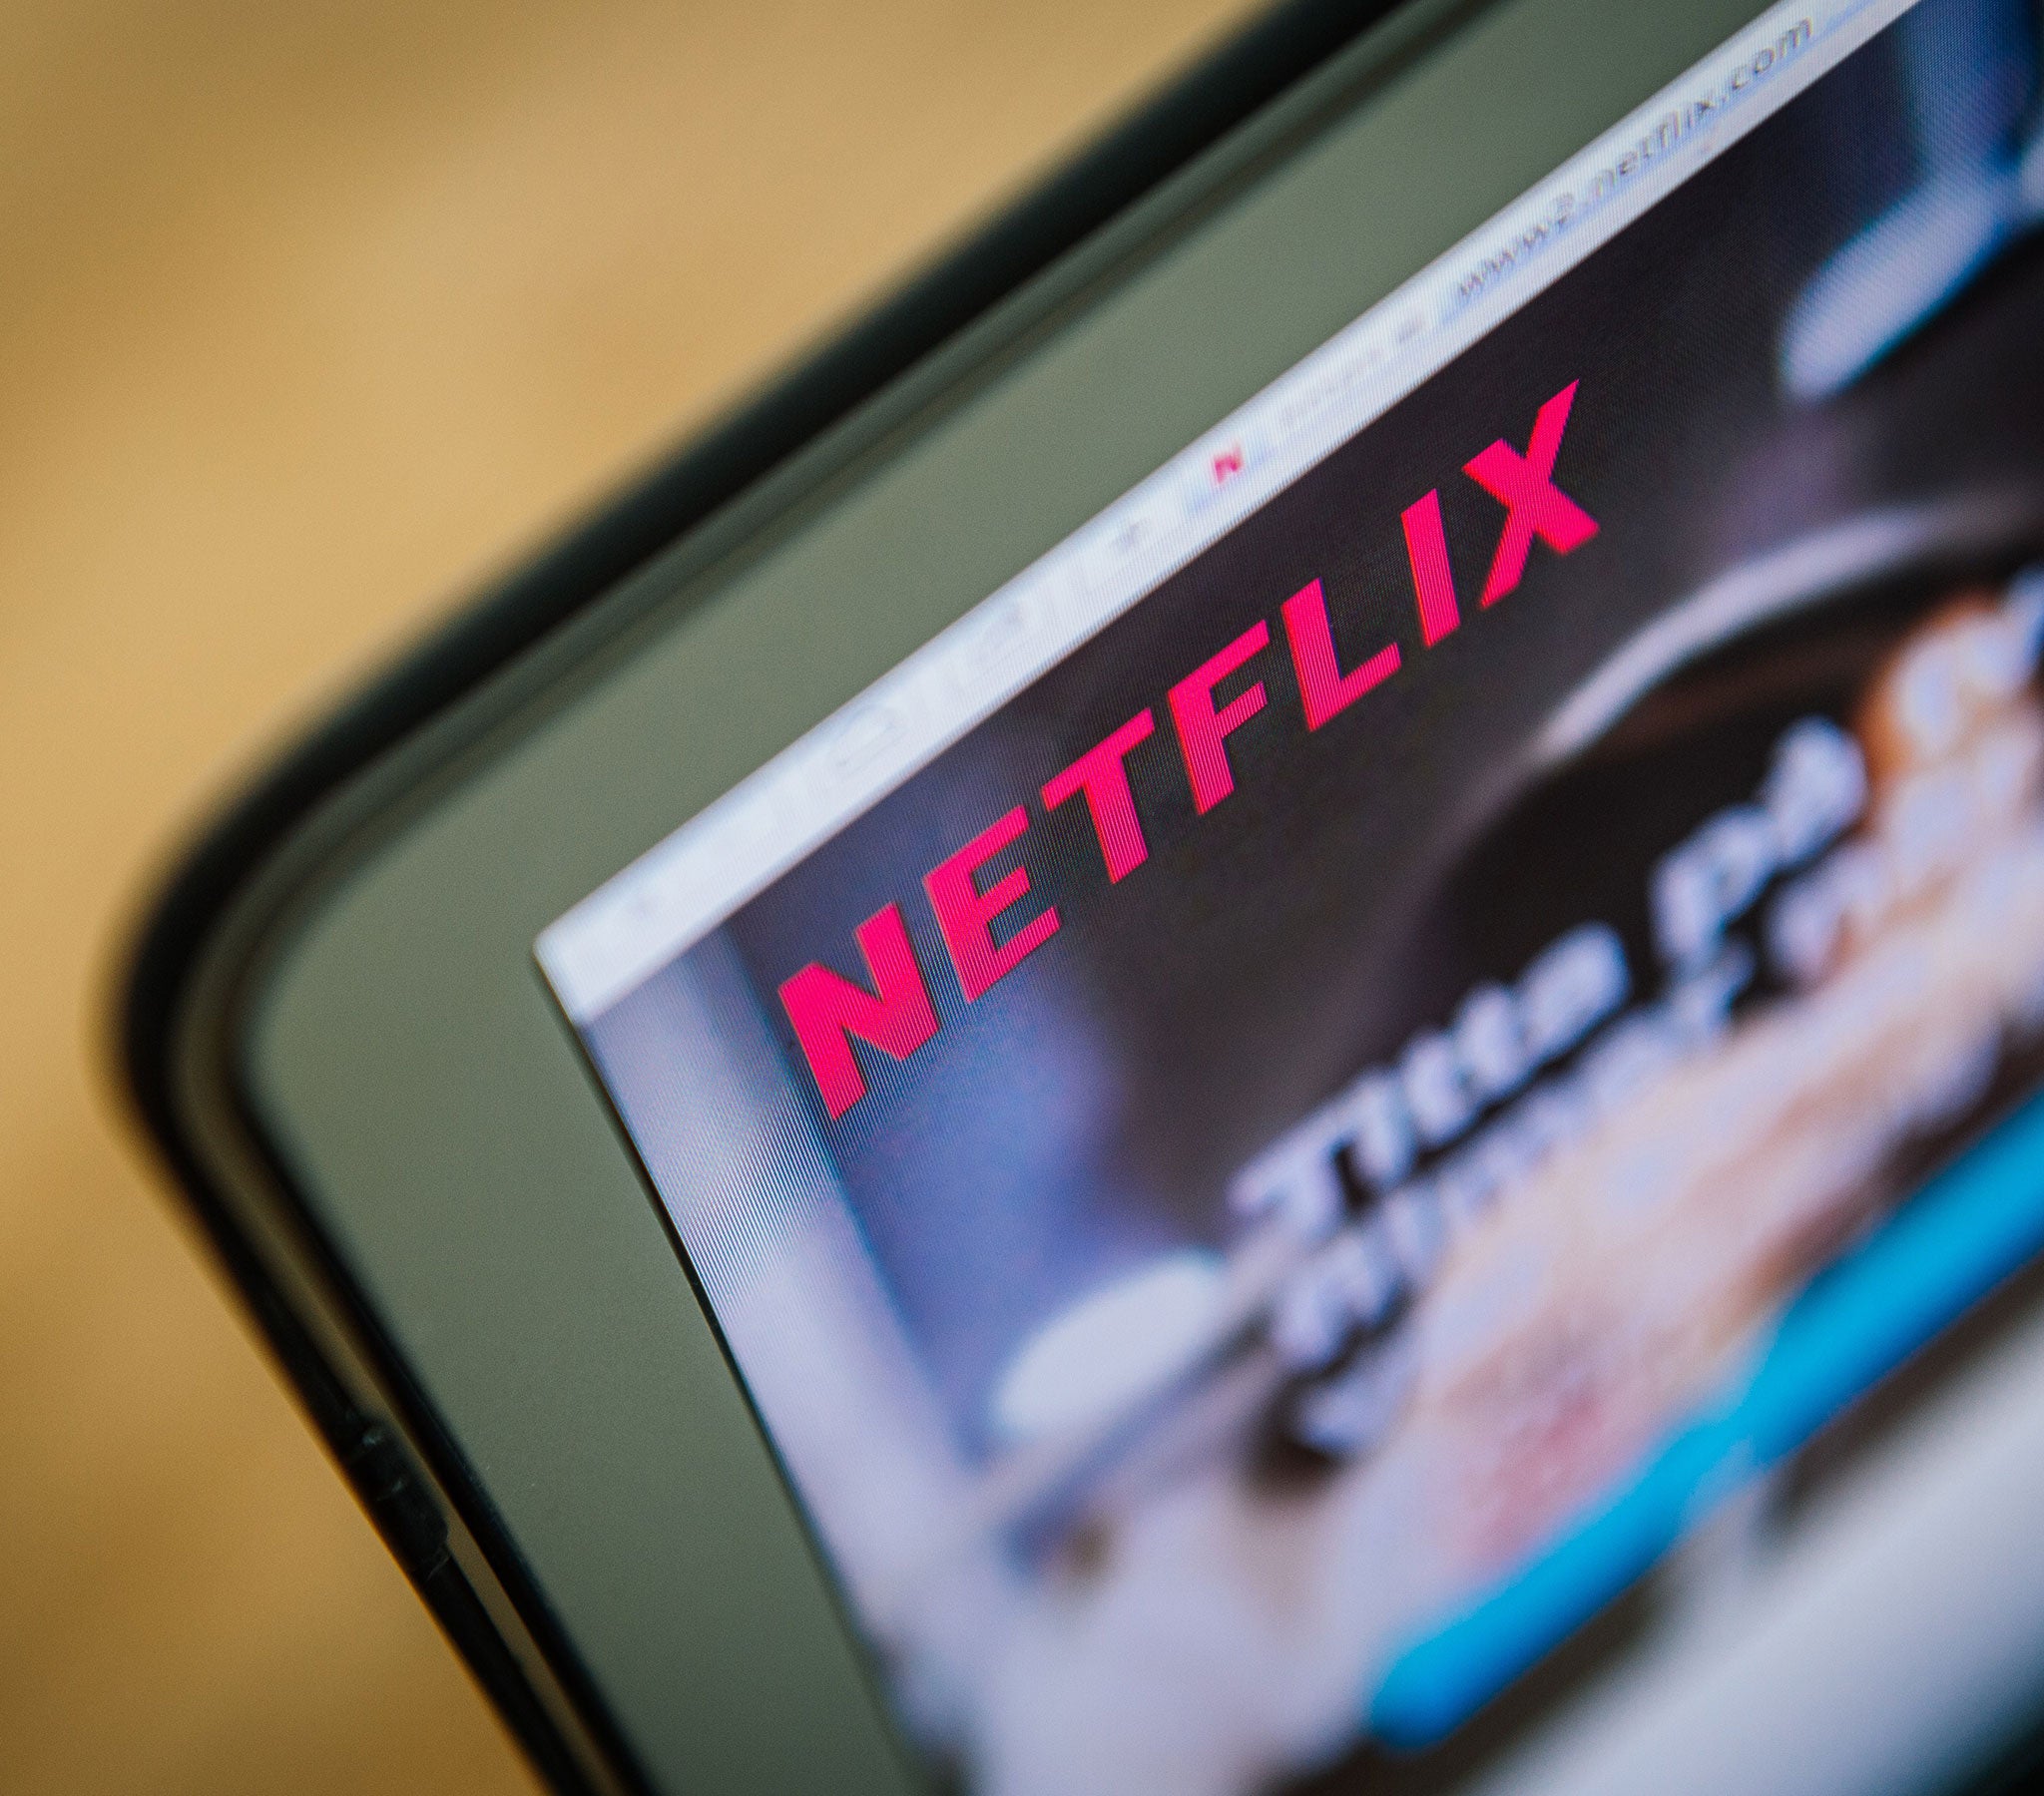 Netflix is down for some users